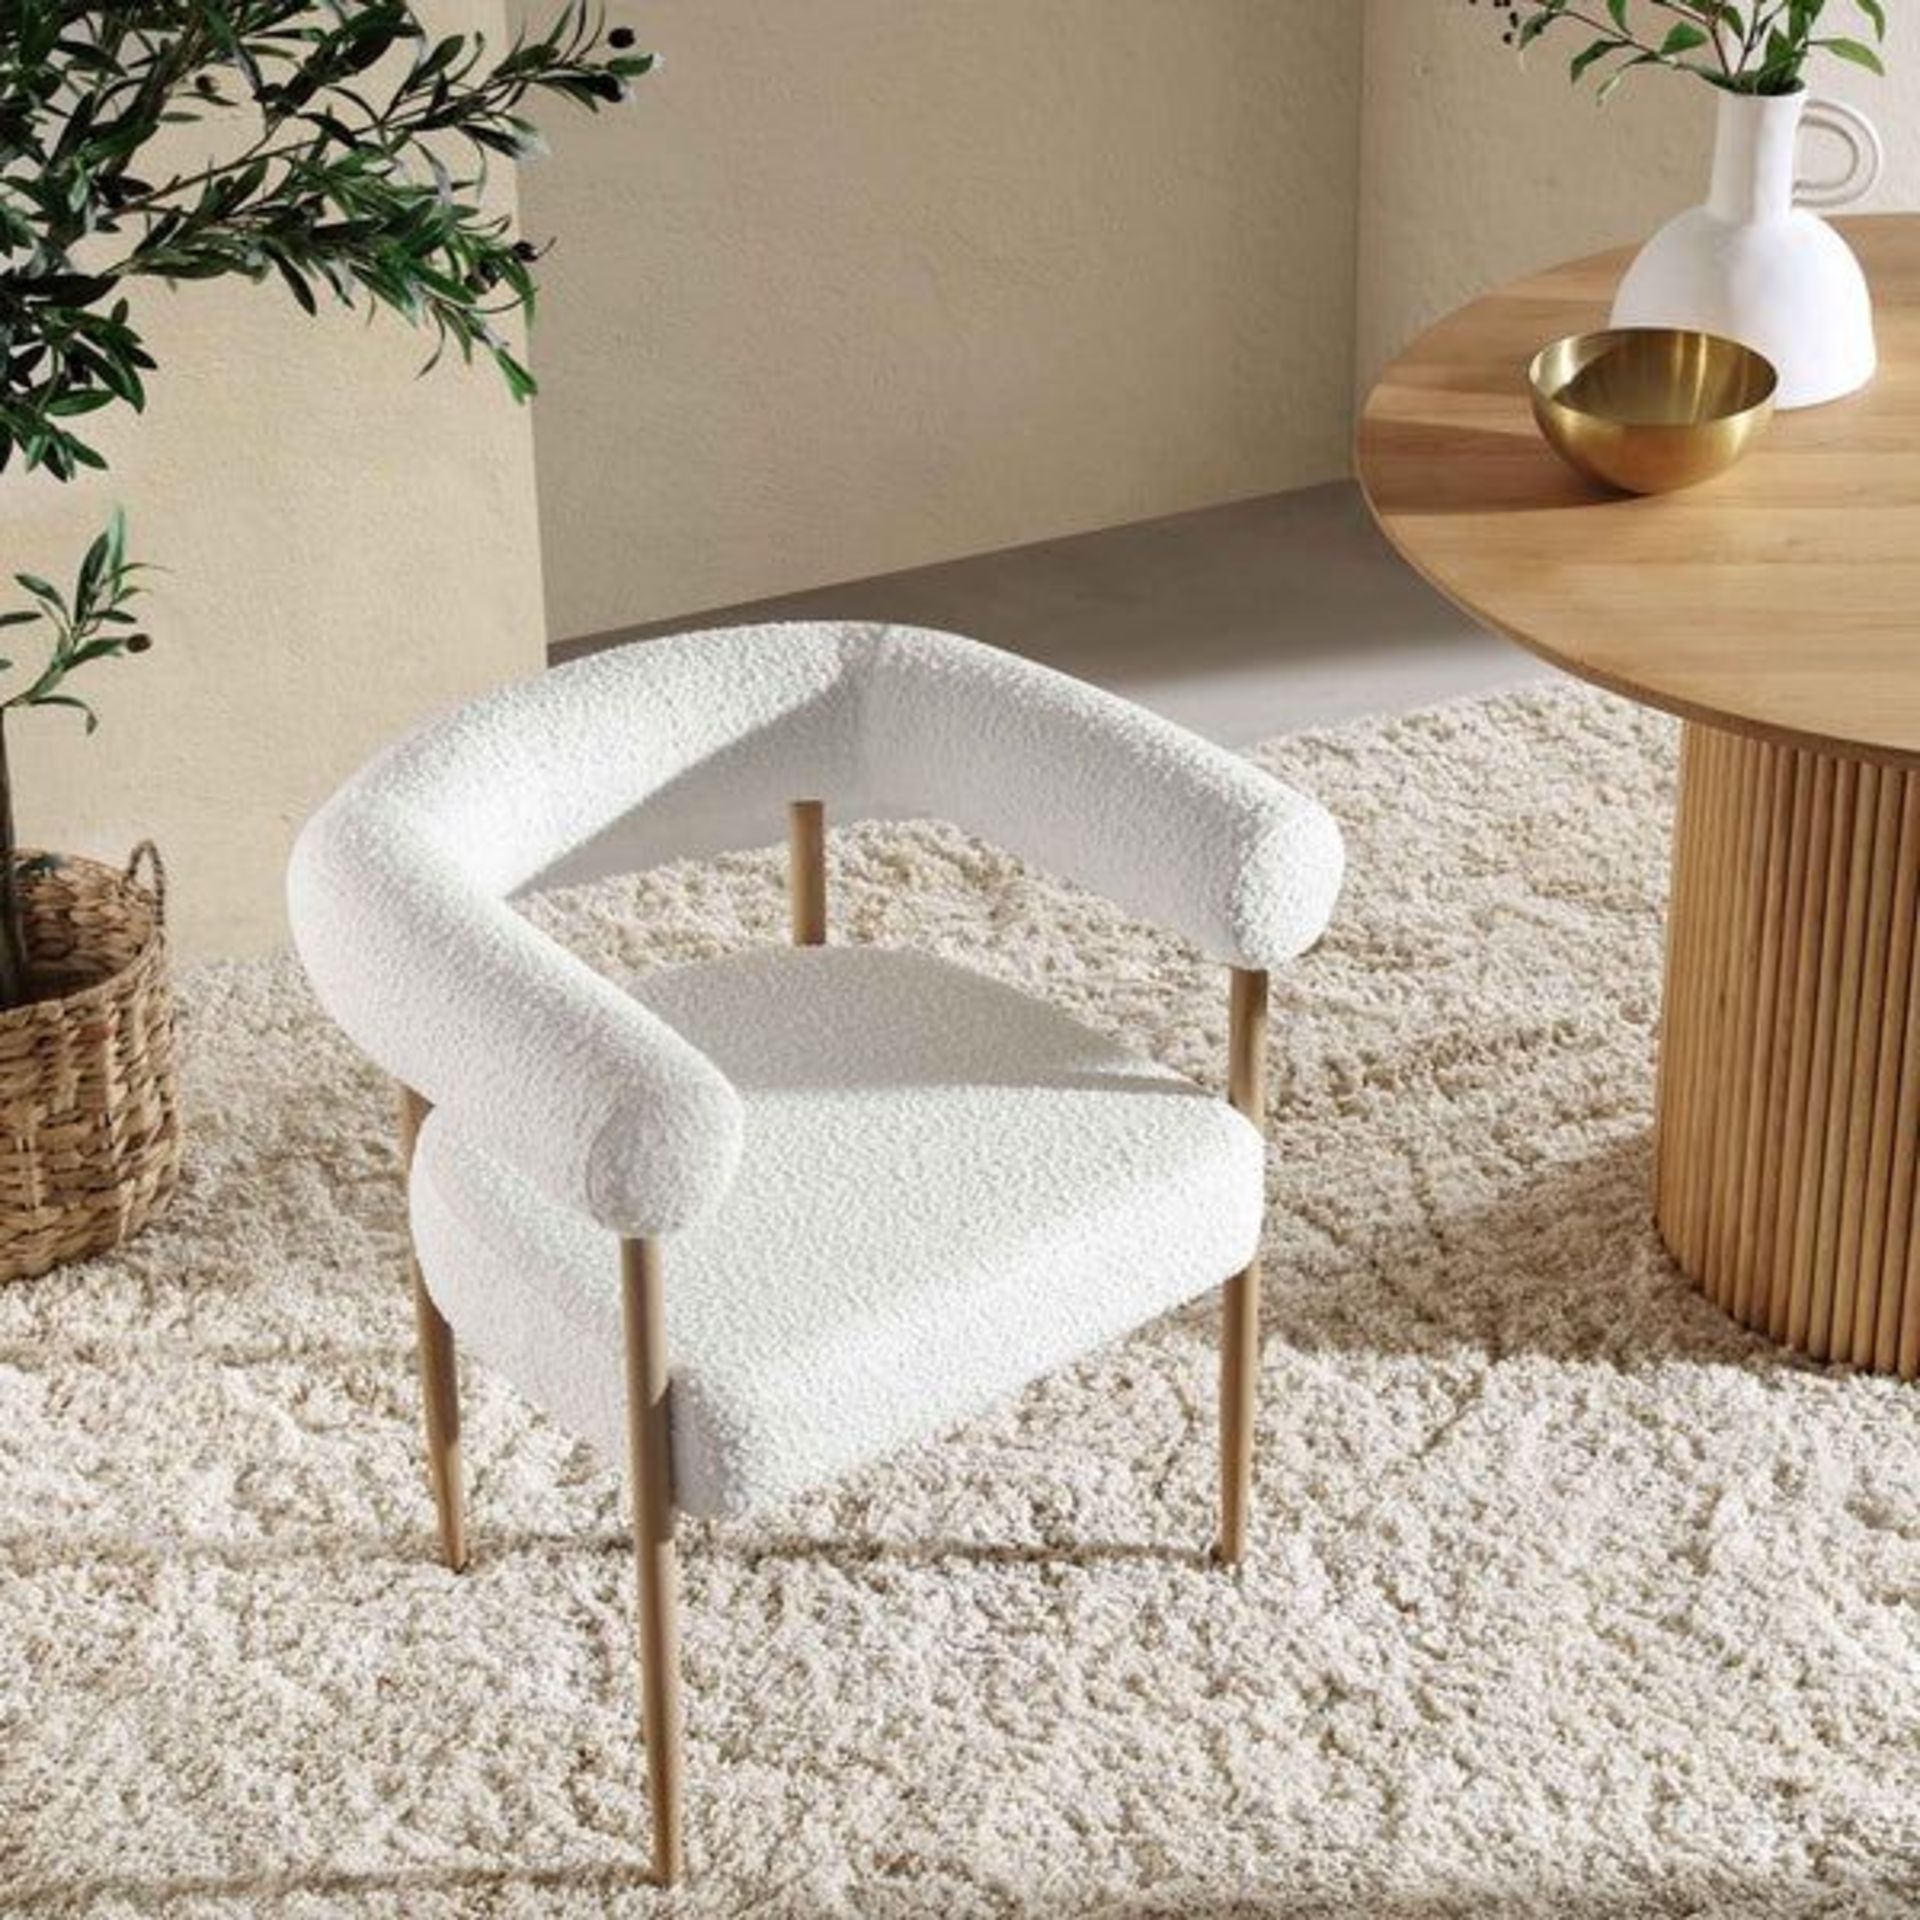 Fulbourn White Boucle Dining Chair with Natural Wood Effect Legs. - ER29. RRP £199.99. A cheerful - Image 2 of 4